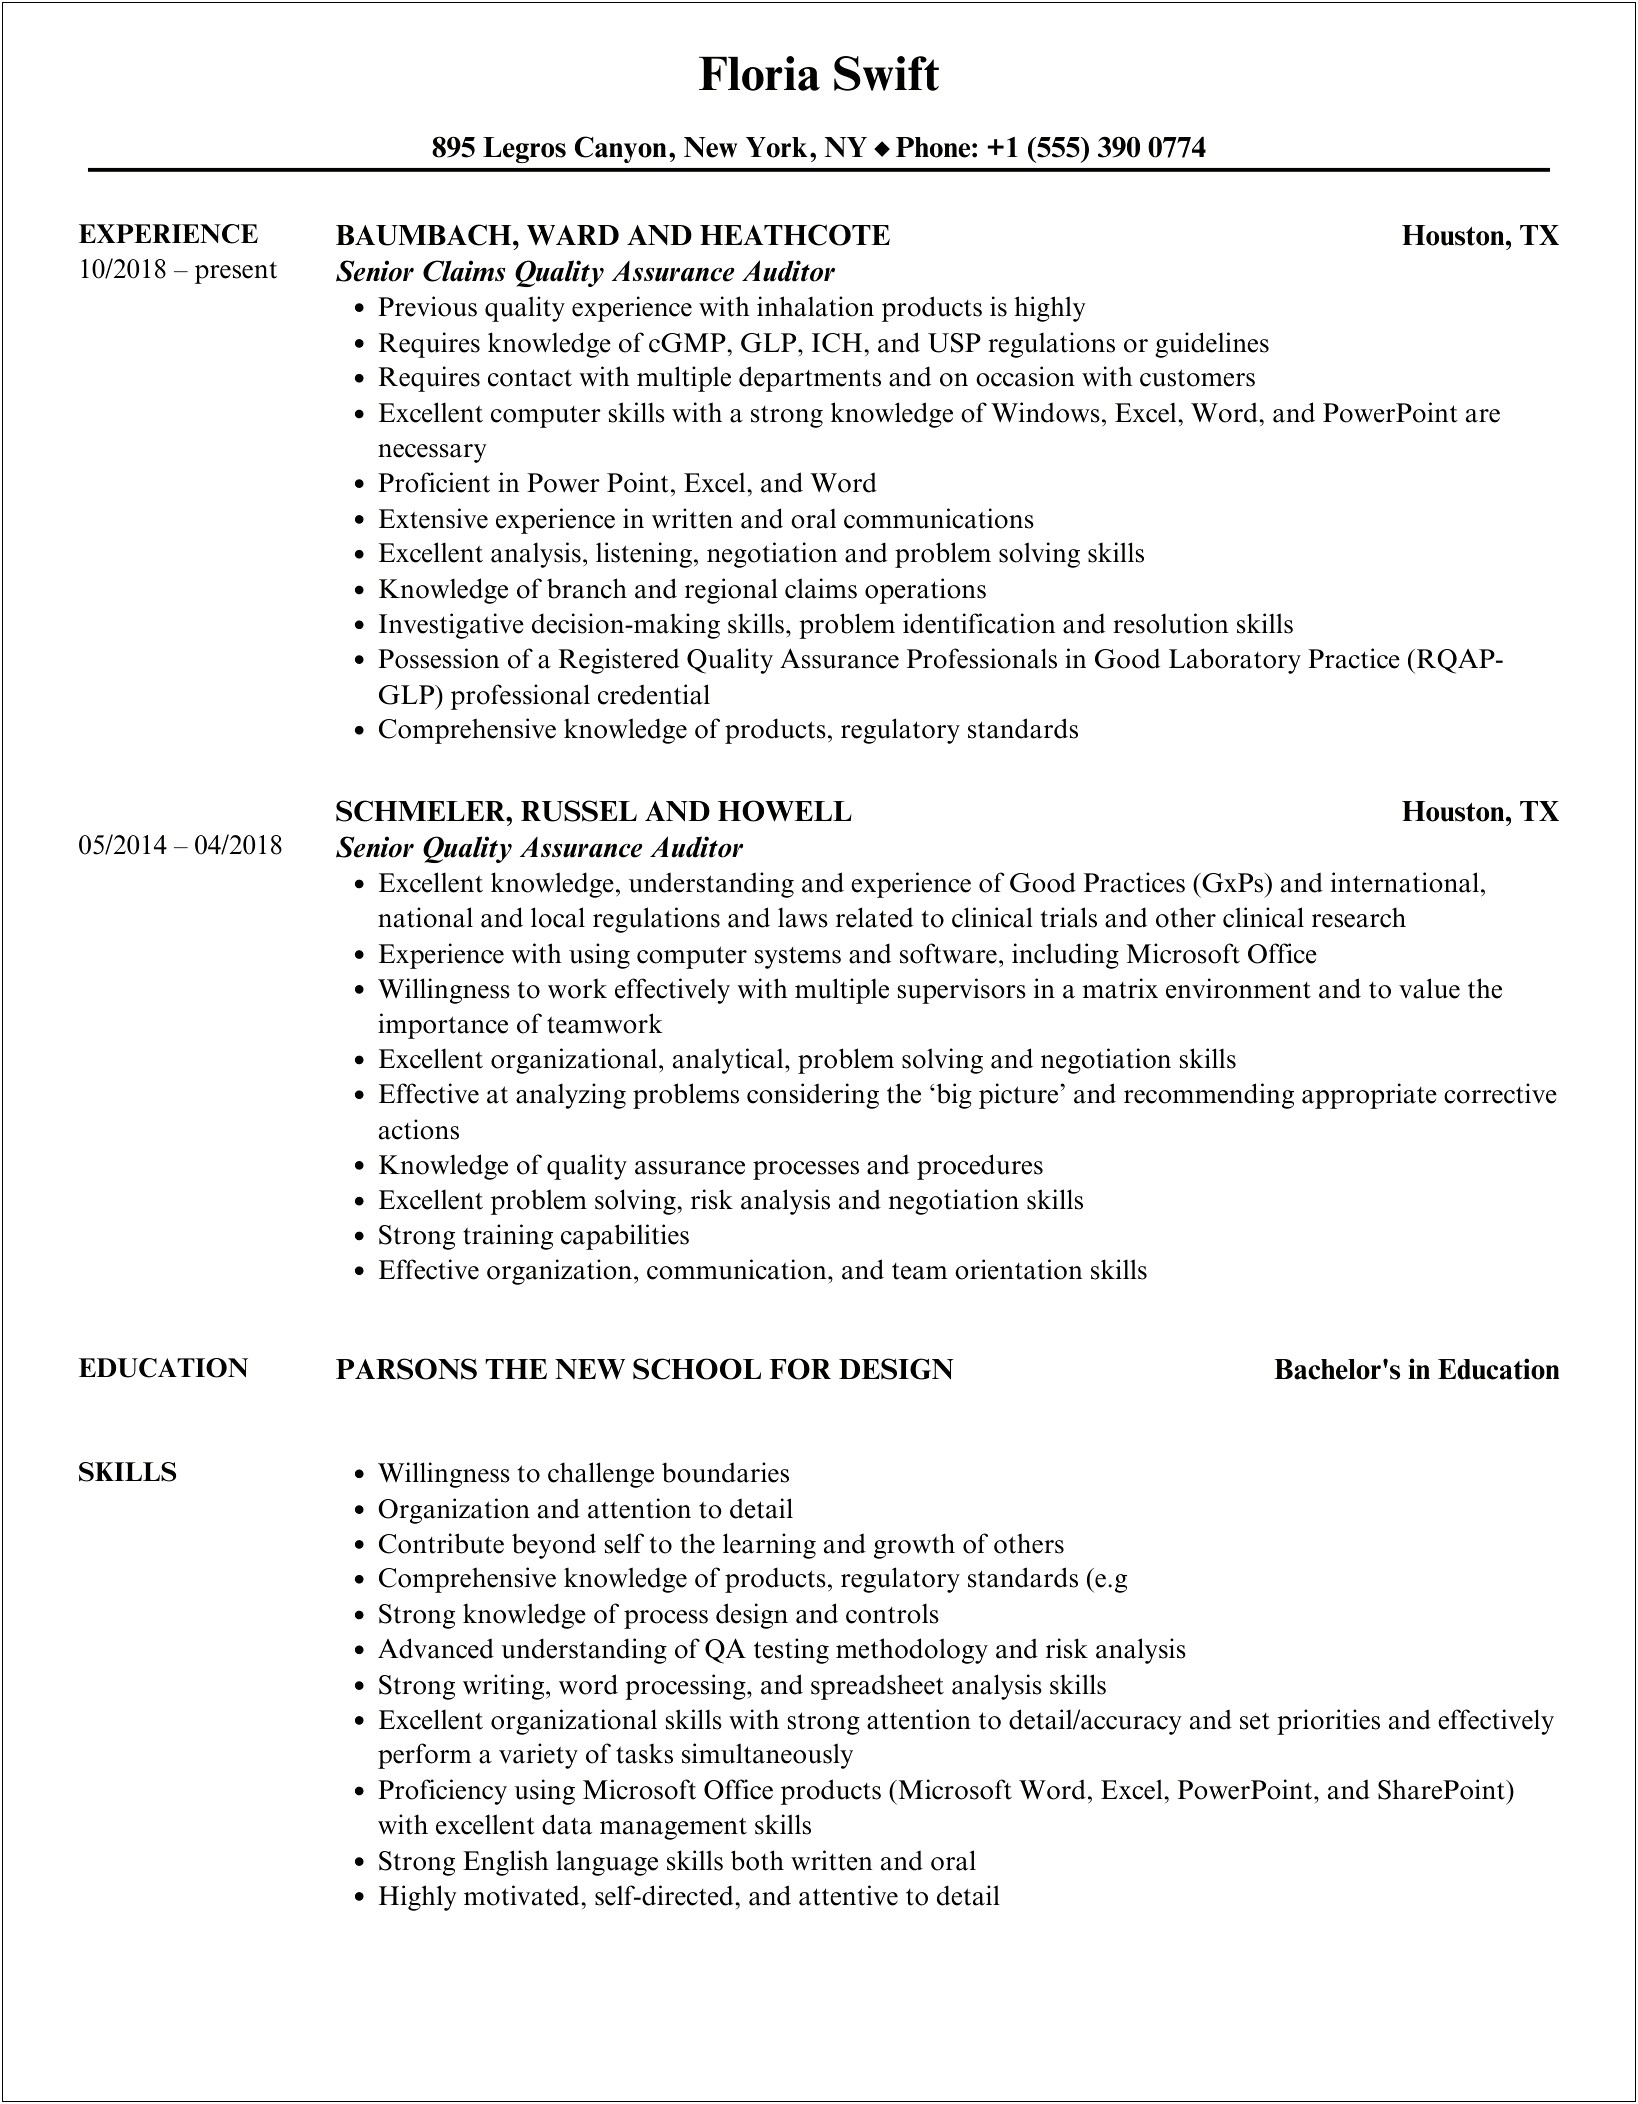 Quality Assurance Analyst Auditor Resume Free Download